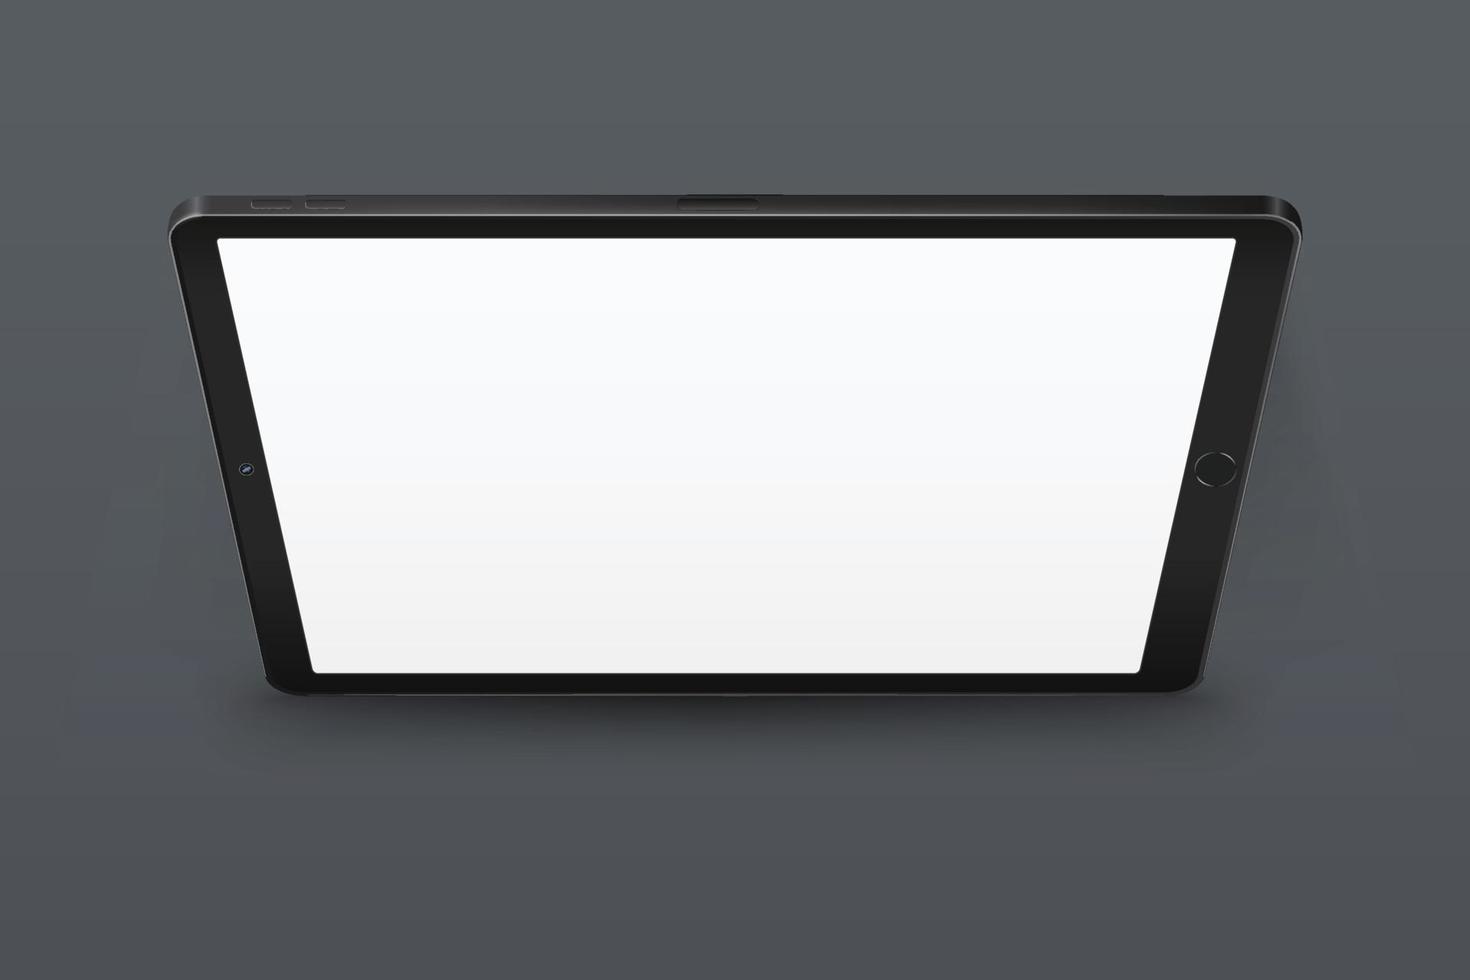 Realistic black empty tablet on a gray background. Device in perspective view. Tablet mockup from different angles. Illustration of device with touchscreen display vector